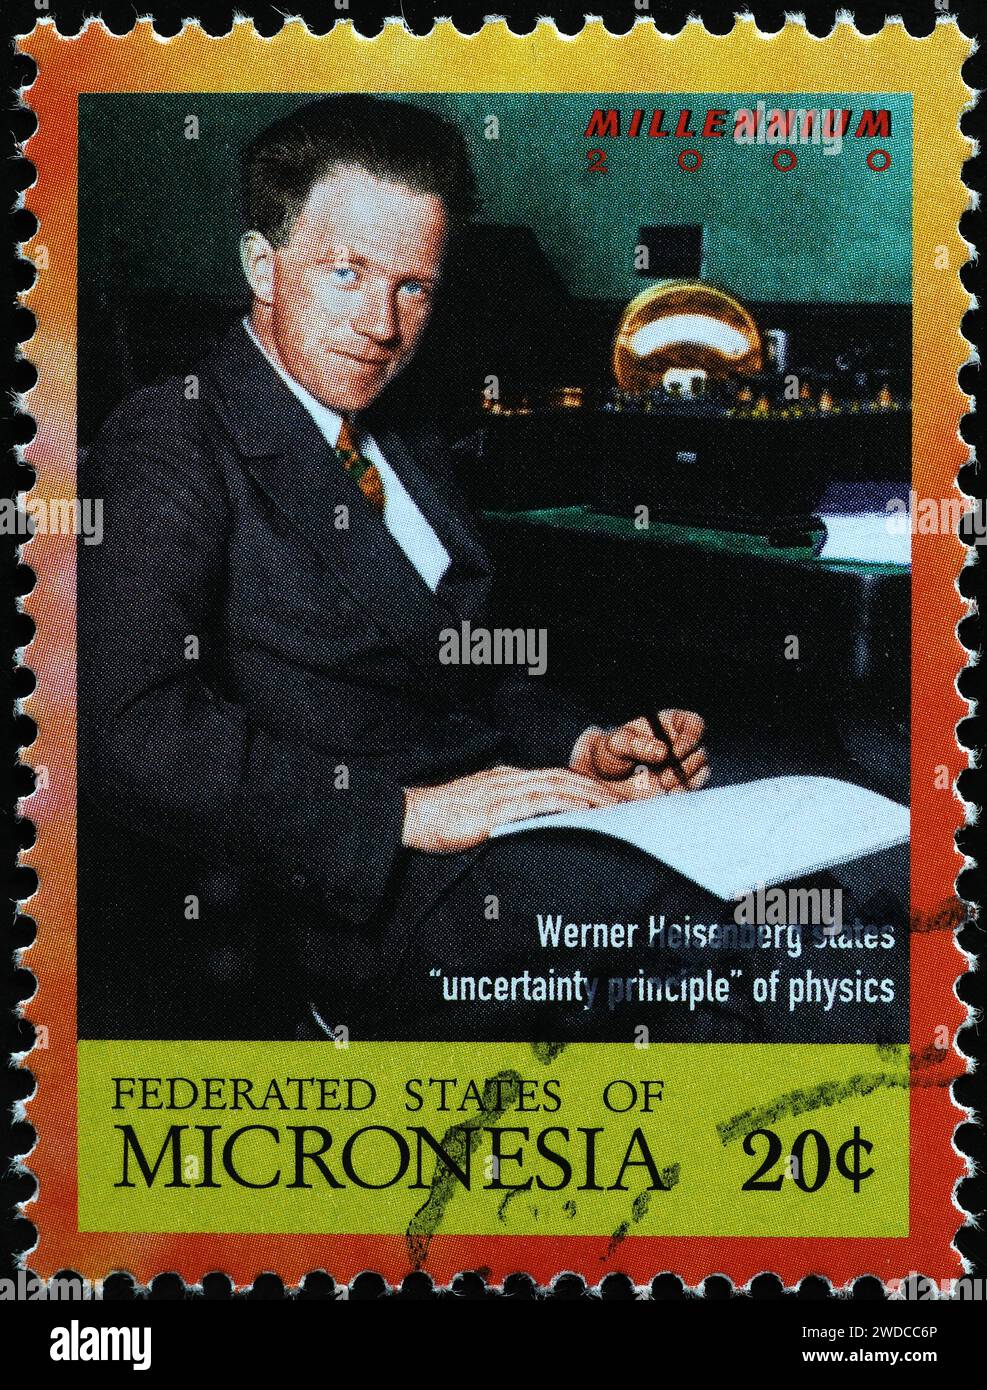 Uncertainty principle of physycs stated by Werner Heisenberg celebrated on stamp Stock Photo